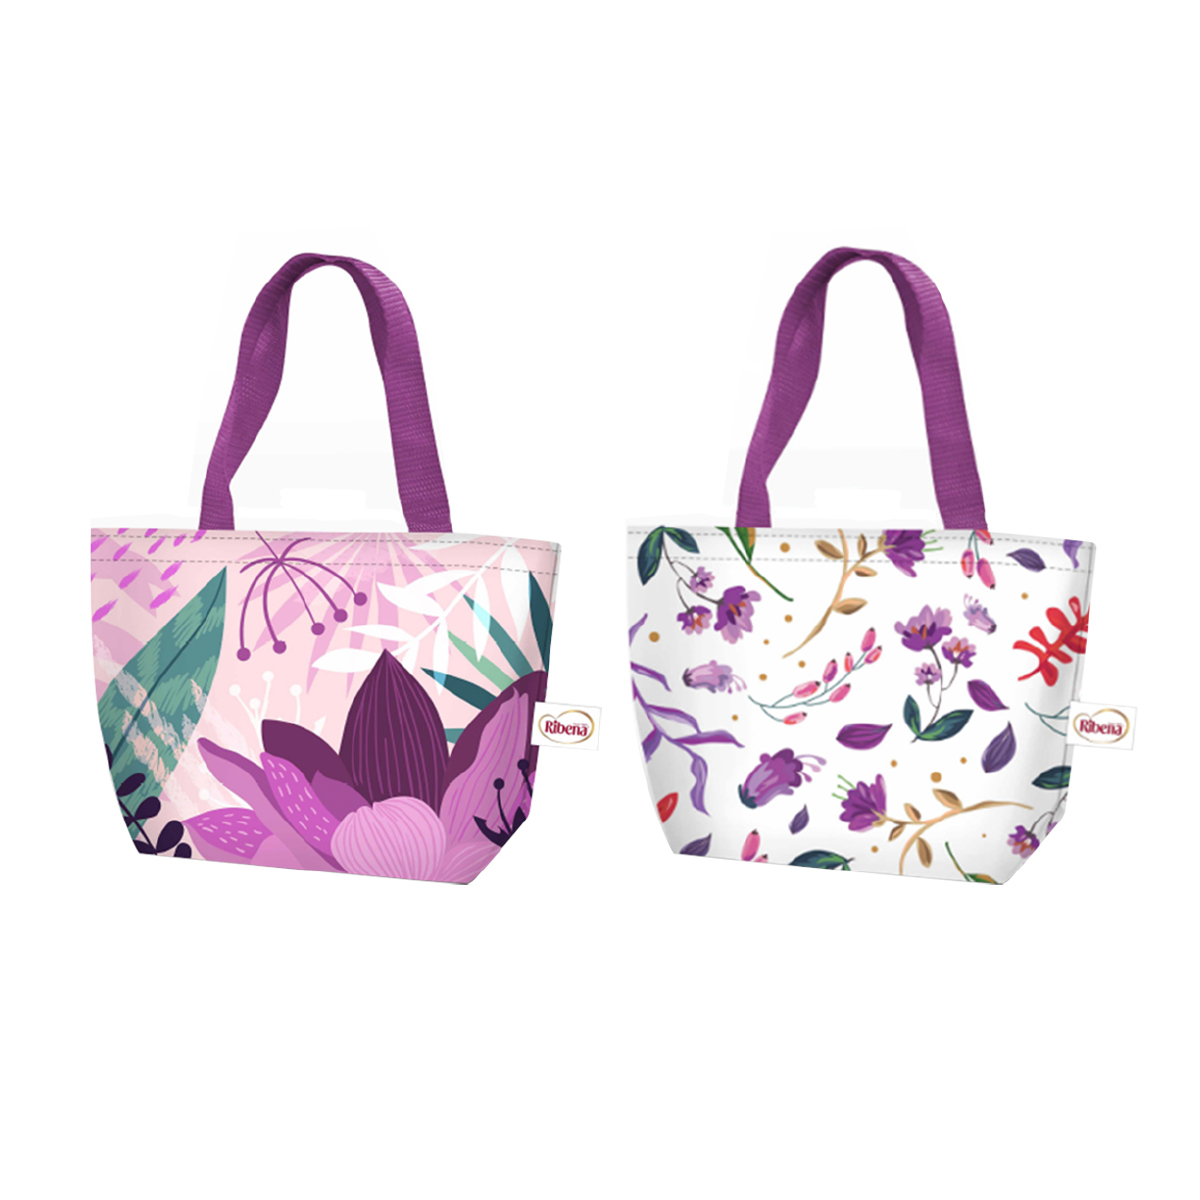 Promotional Lunch Tote Bag